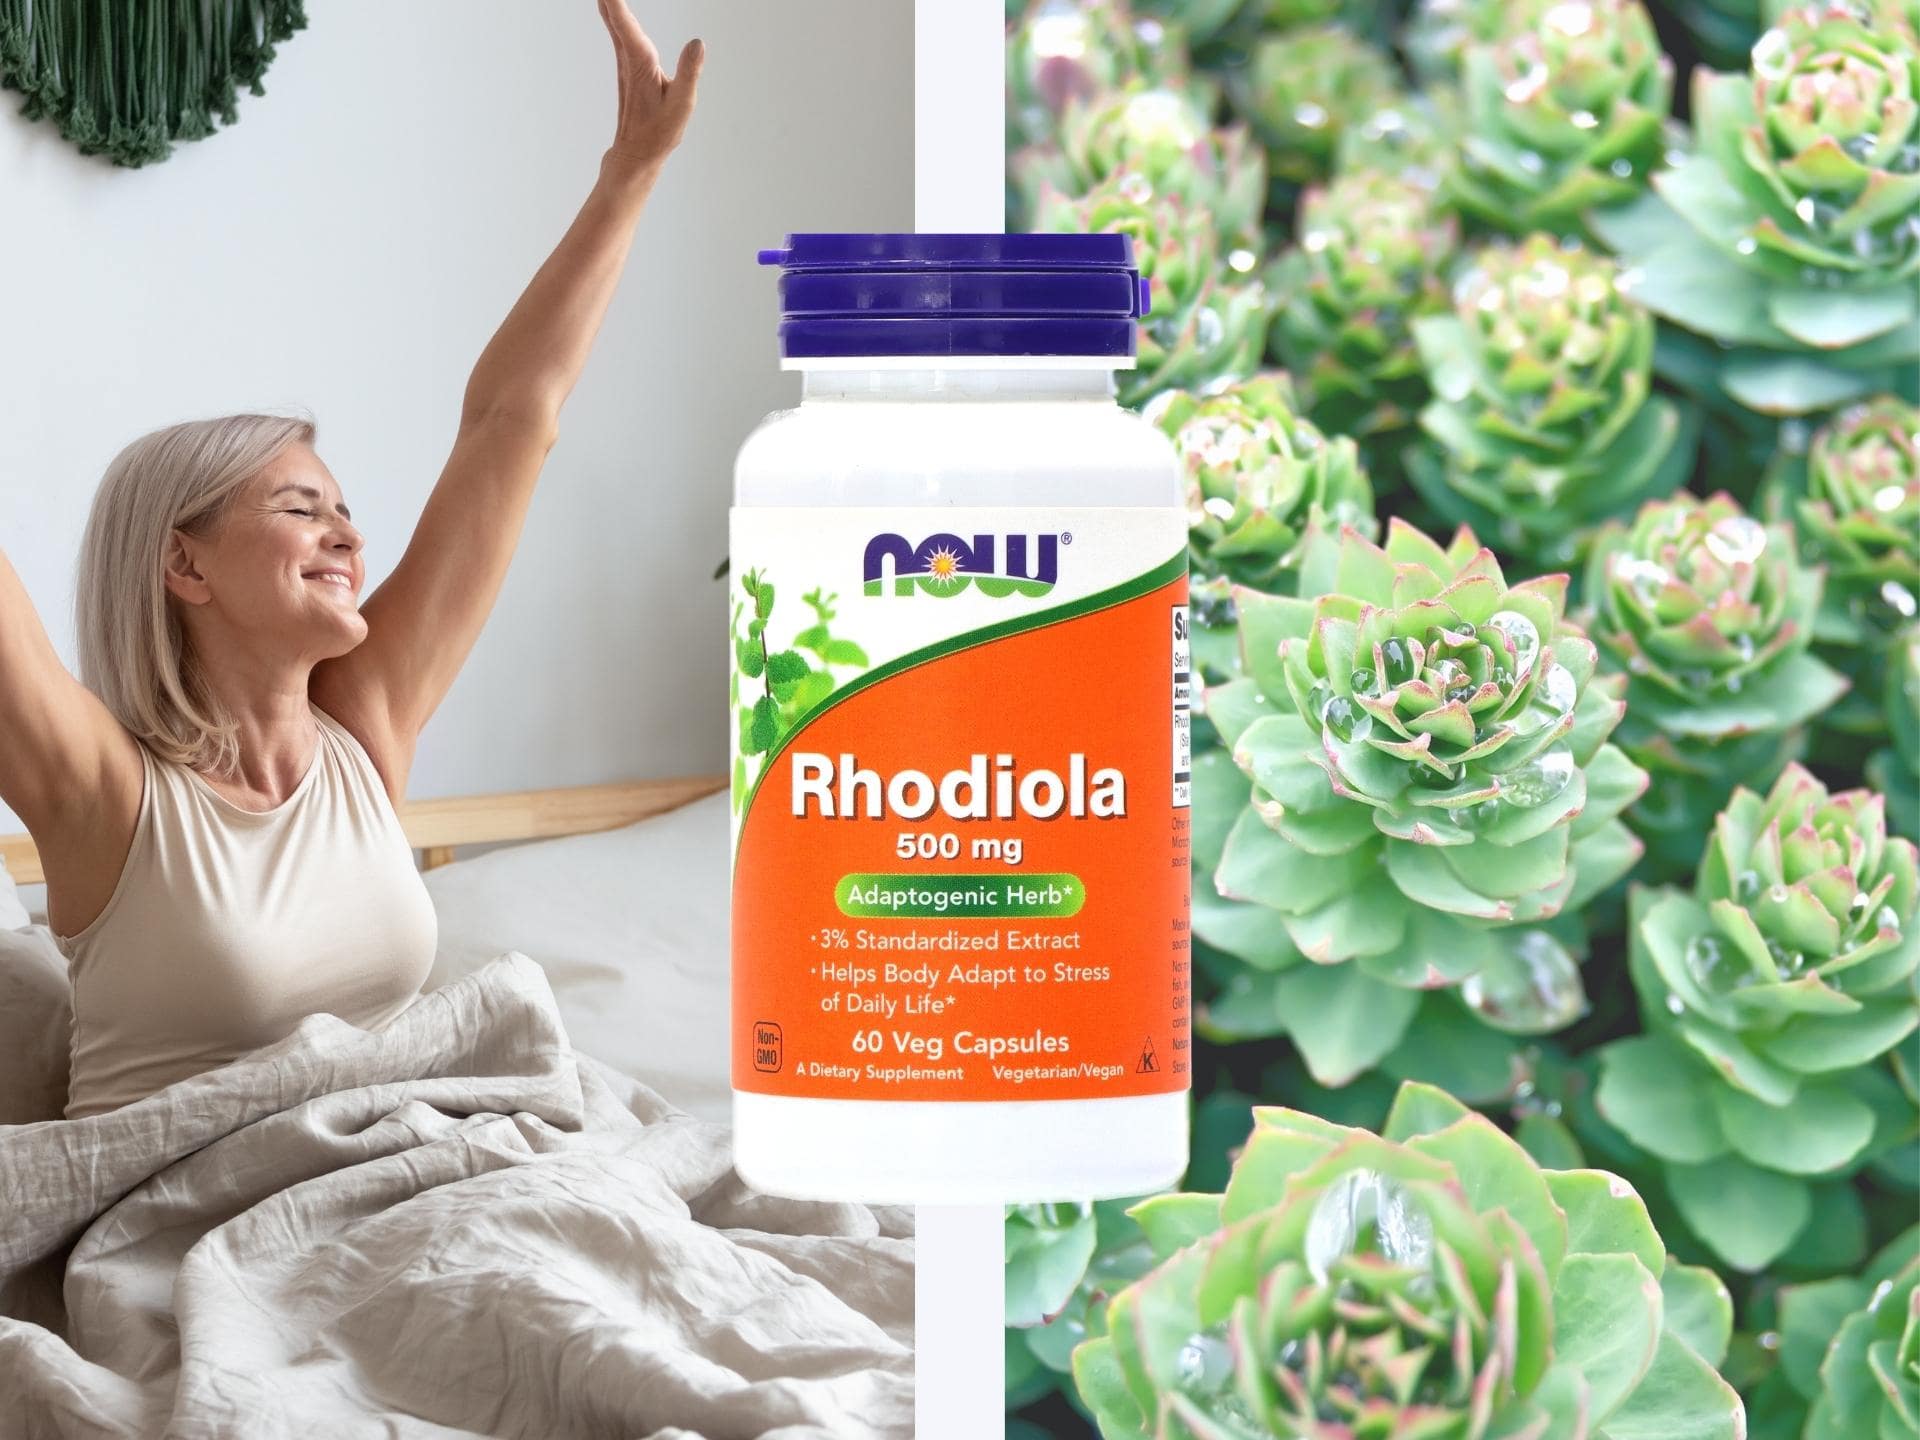 NOW Rhodiola Rosea 500 mg Extract - 60 vcaps